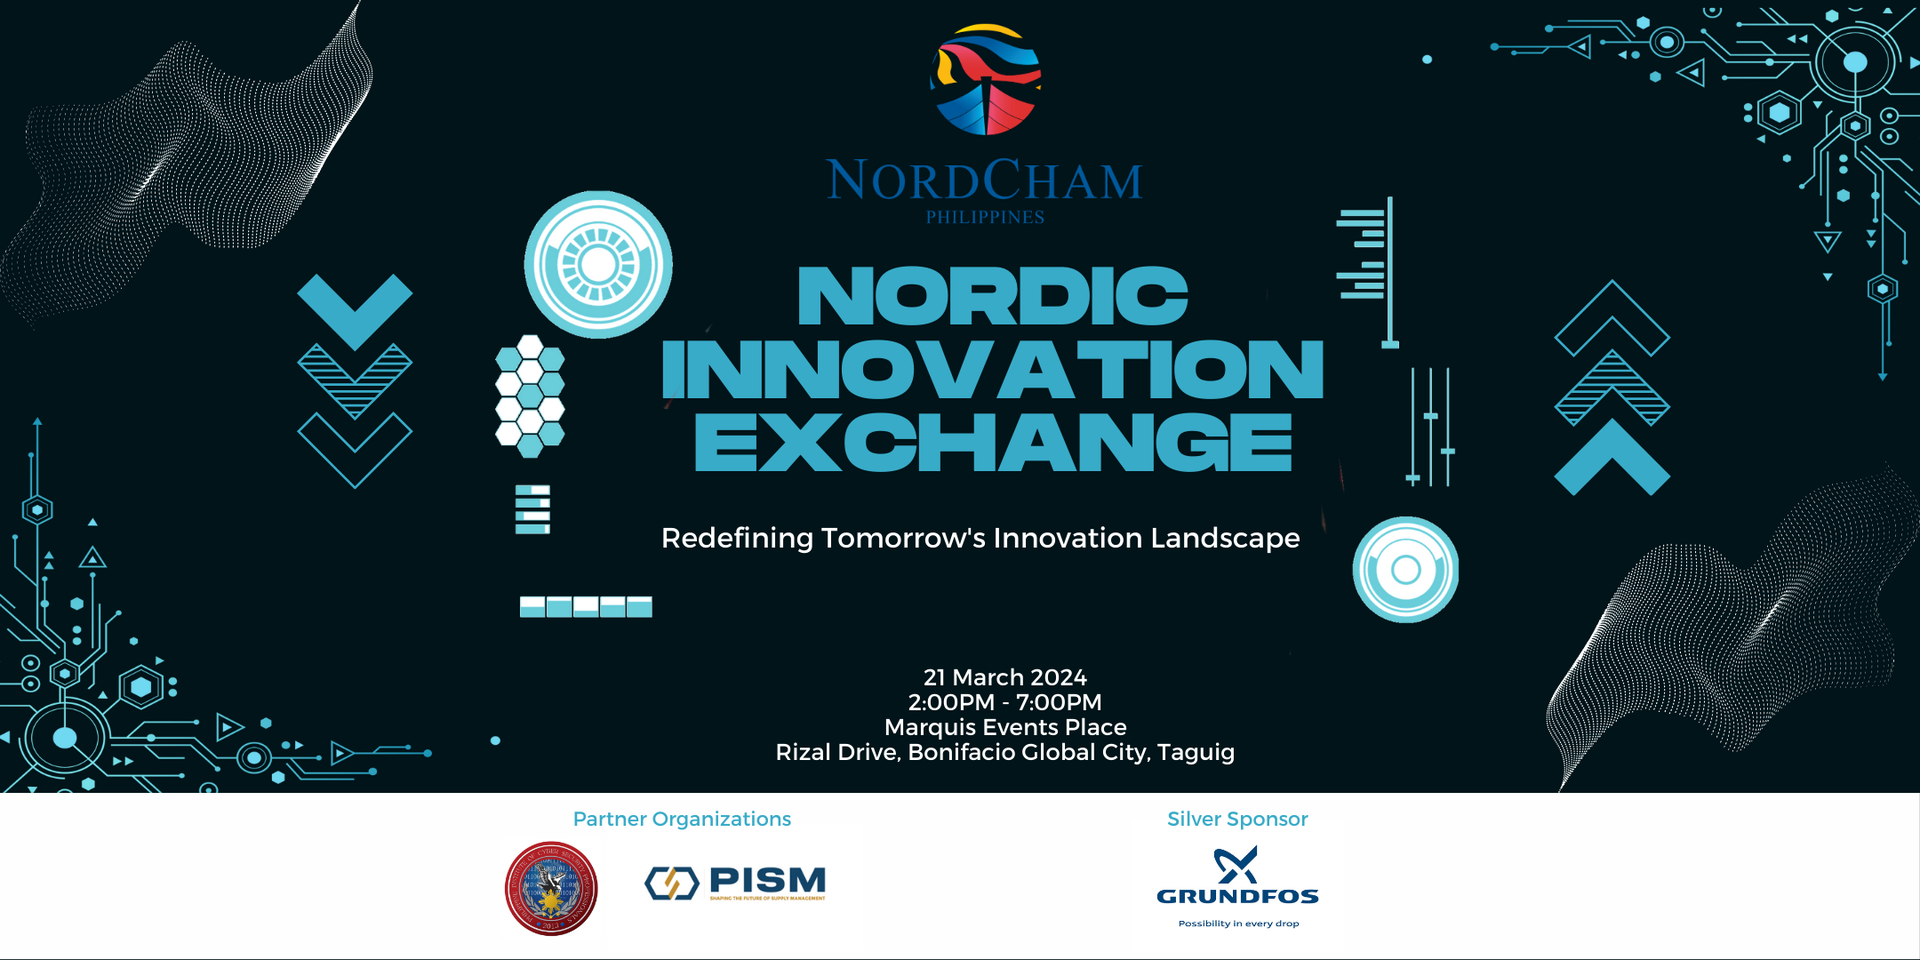 thumbnails NORDIC INNOVATION EXCHANGE | 21 MARCH 2024 | MARQUIS EVENTS PLACE